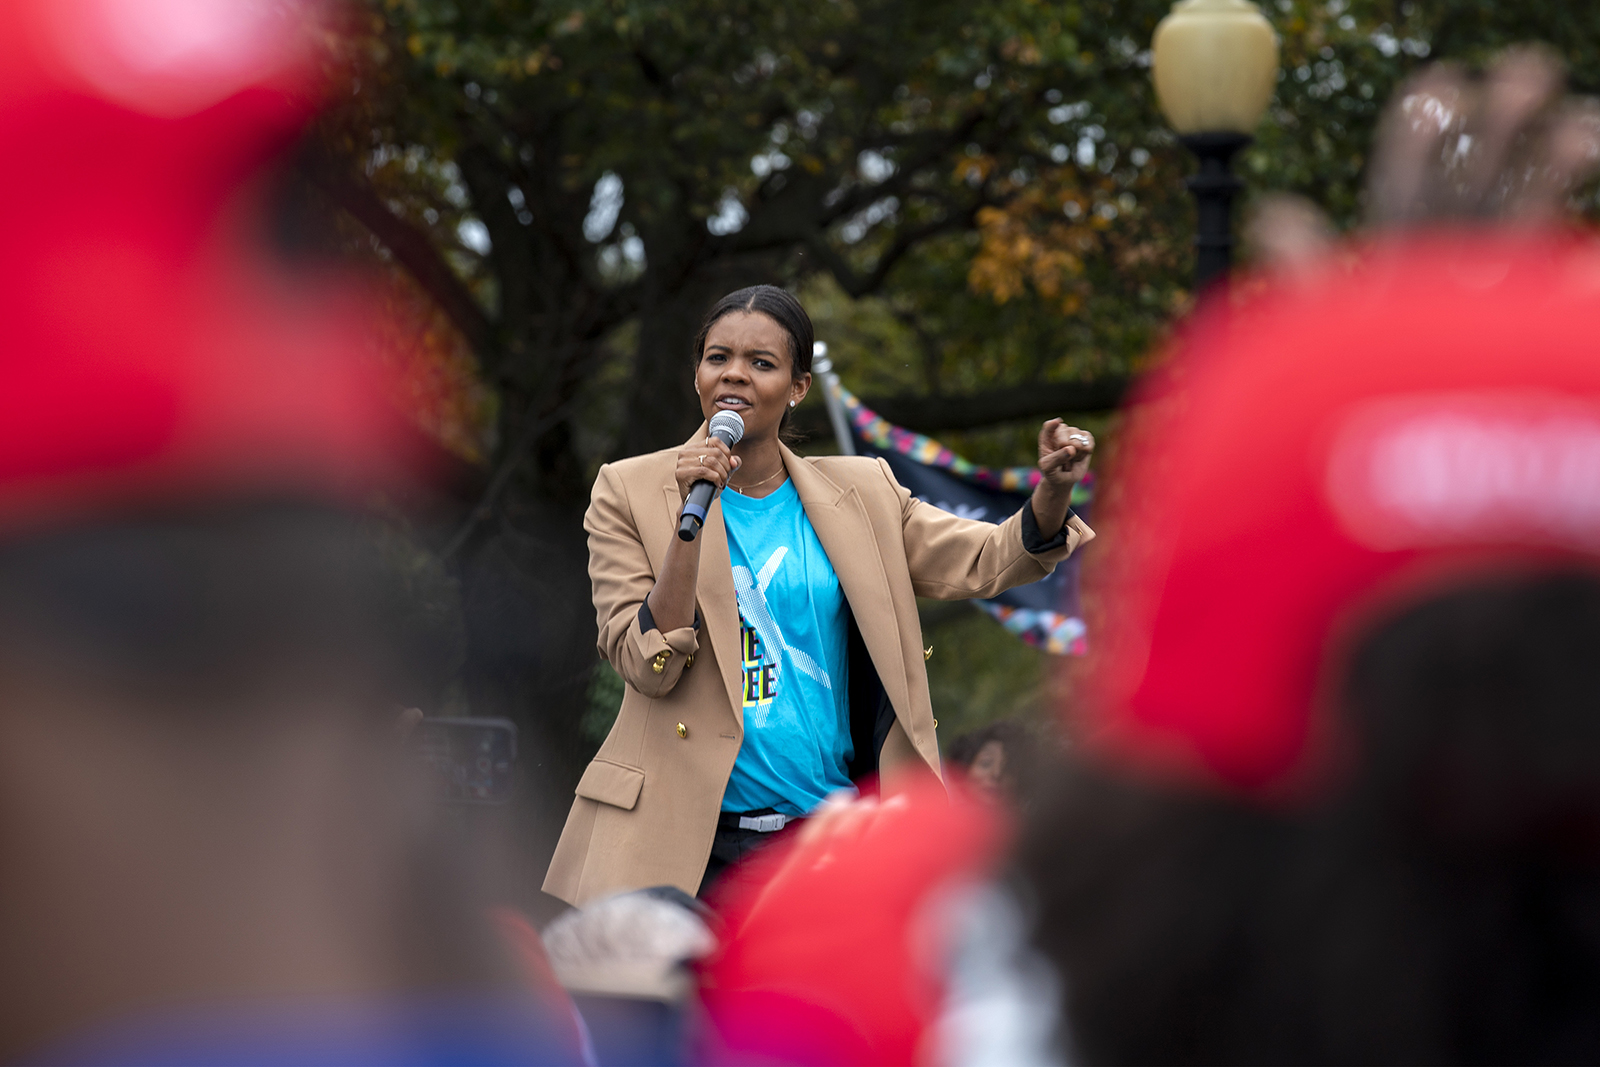 Conservative commentator and political activist Candace Owens speaks at a rally on The Ellipse at the White House, Saturday, Oct. 10, 2020, in Washington.  (AP Photo/Jose Luis Magana)